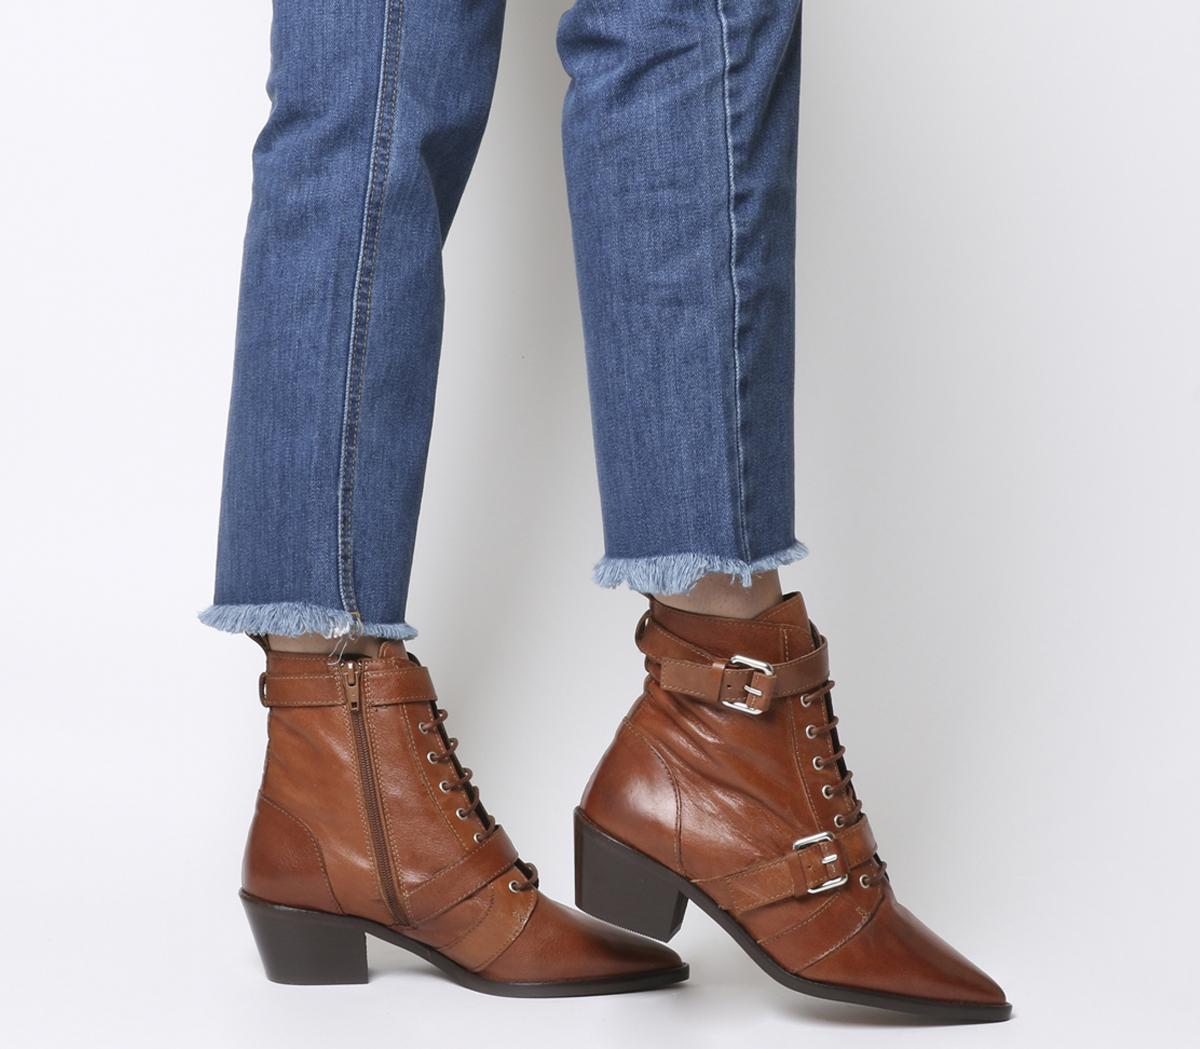 OFFICEAmbassador Lace Up BootsTan Leather